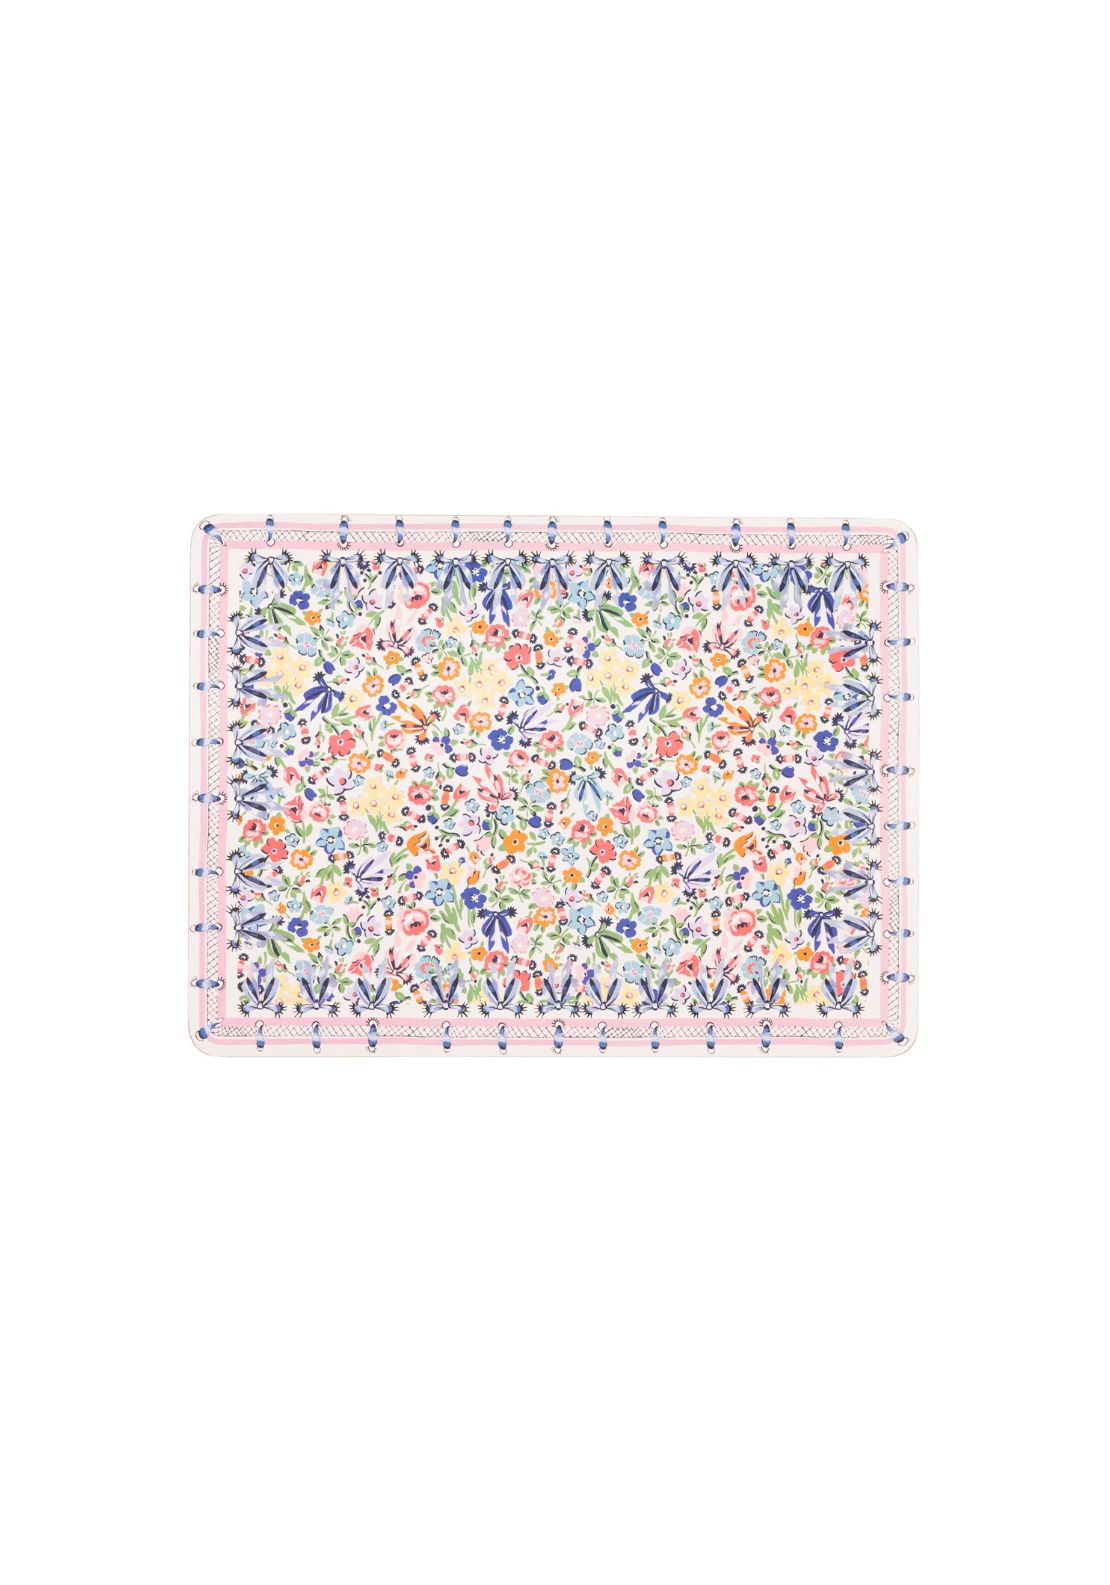 Cath Kidston Harmony Ditsy 4 Pack Cork Back Placemats 1 Shaws Department Stores